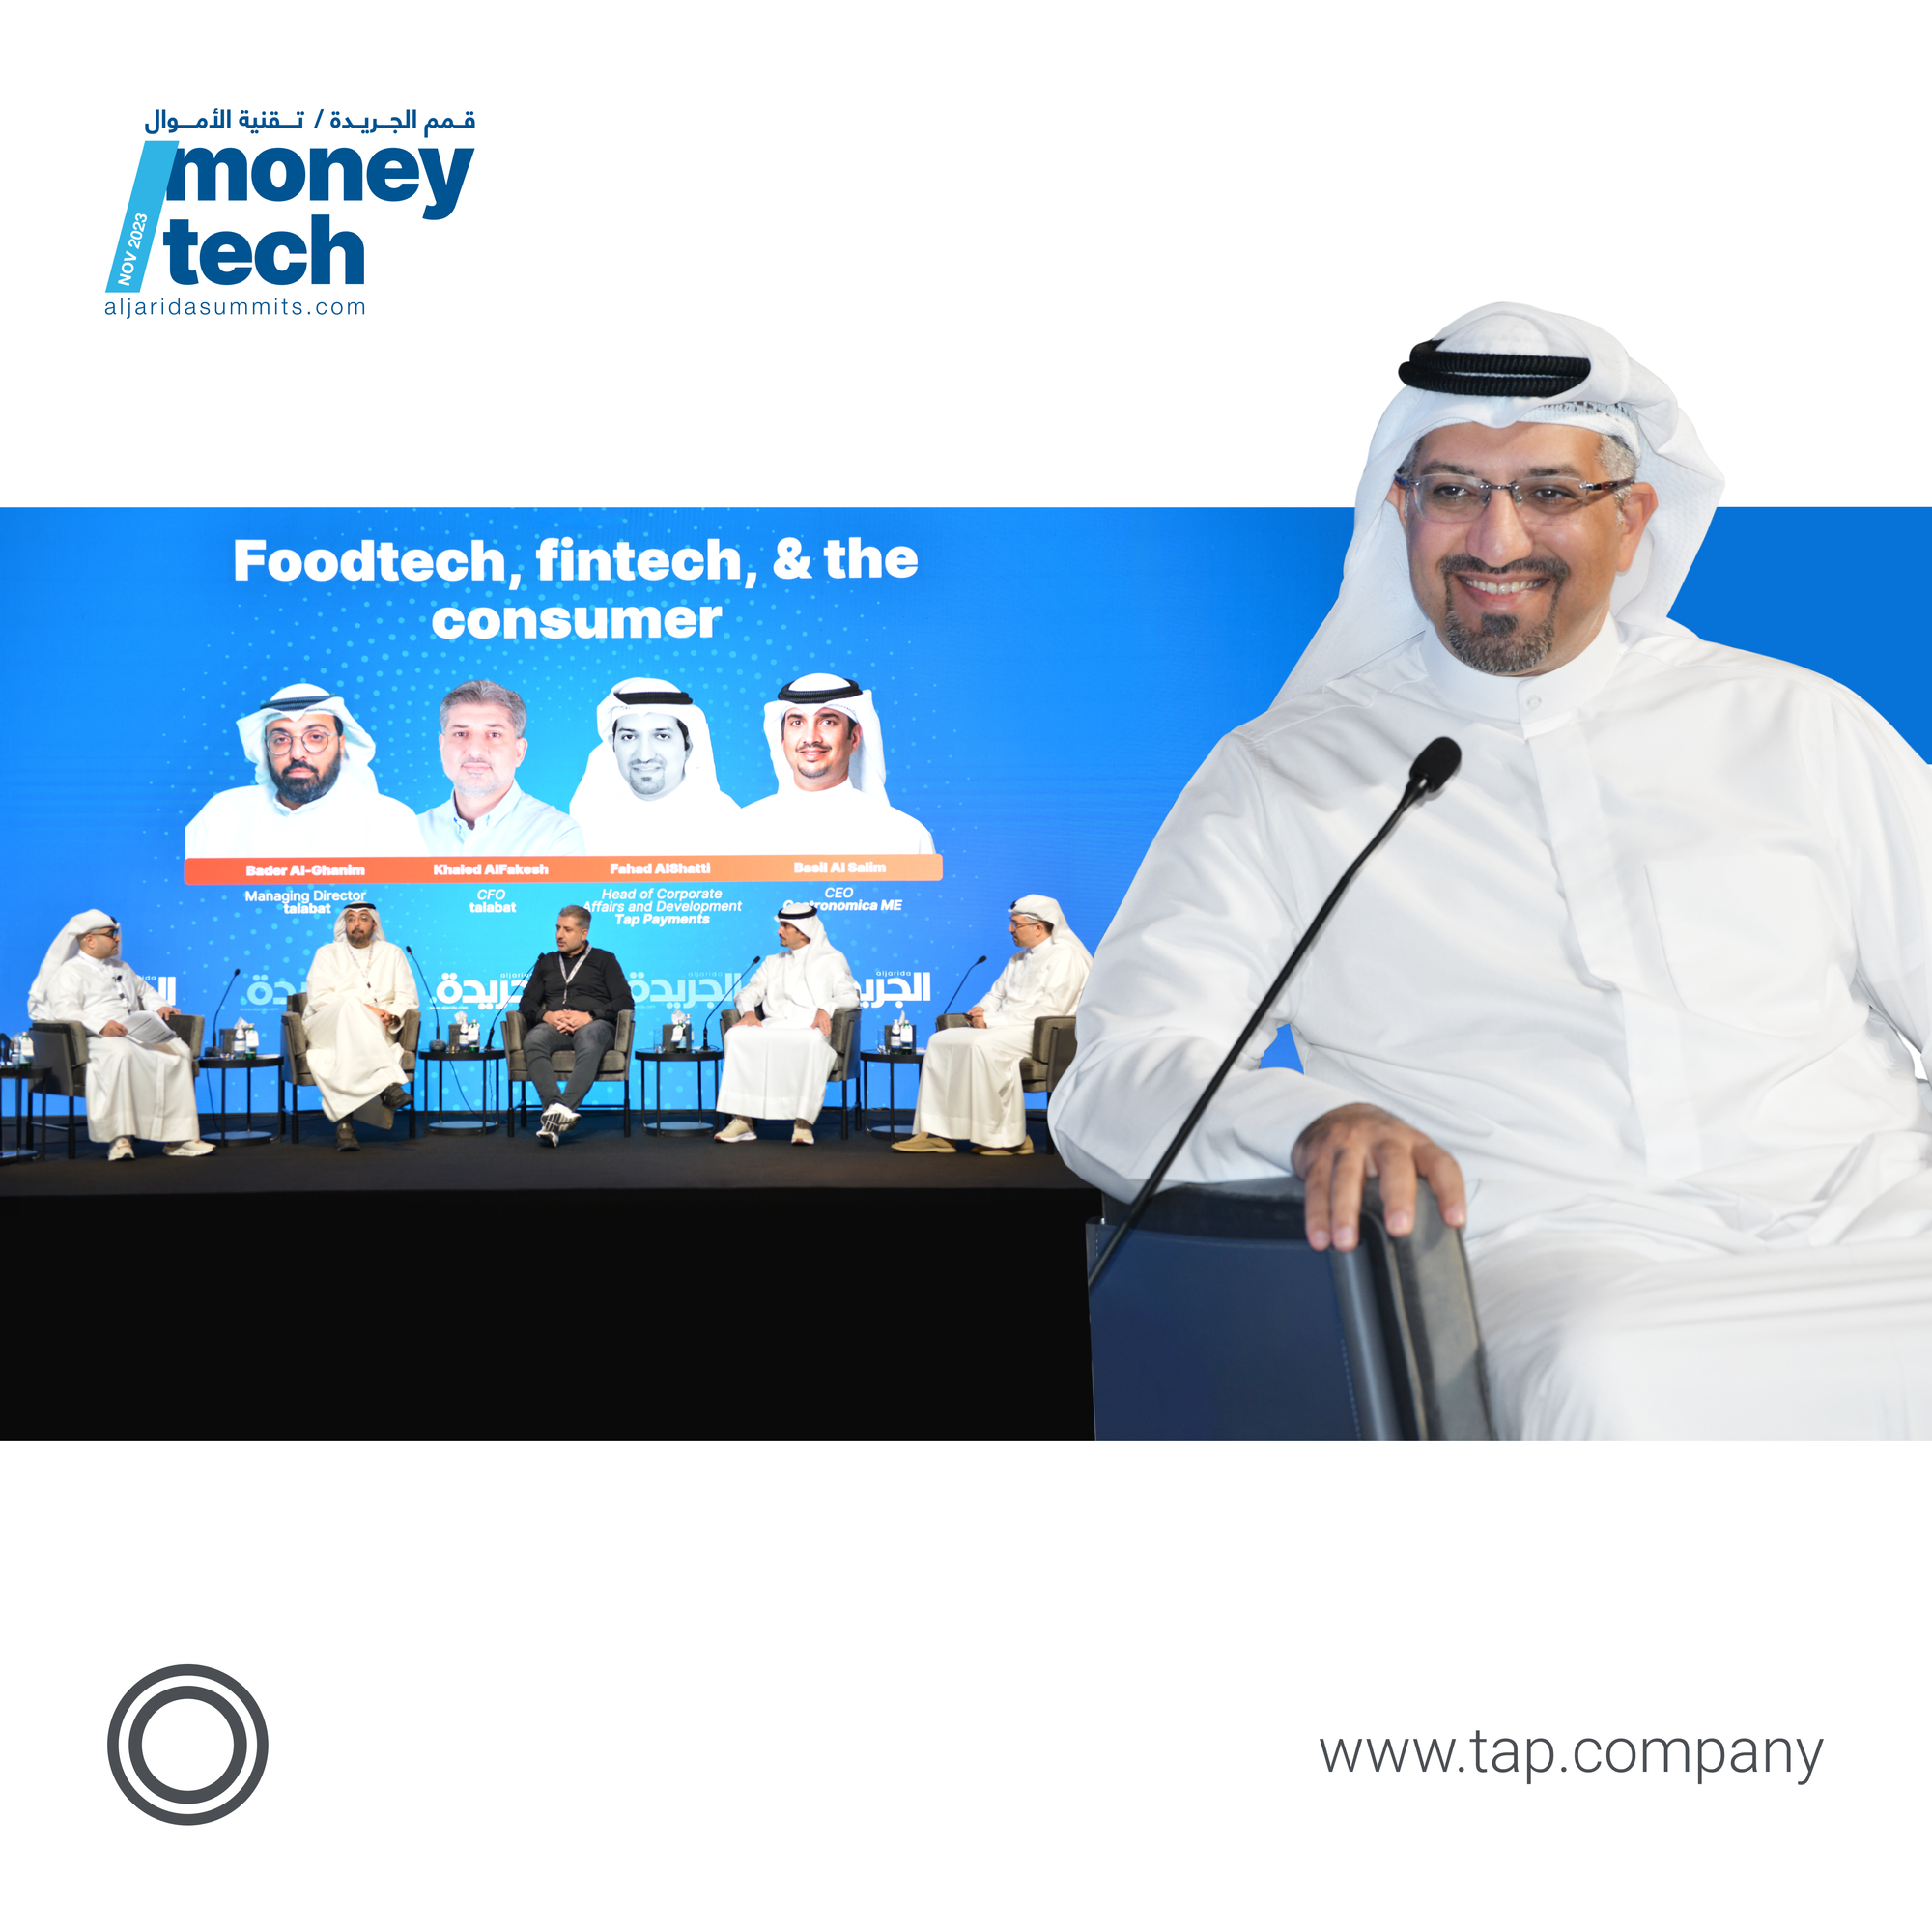 Fahad Al Shatti, our Head of Corporate Development and Affairs speaking at Moneytech